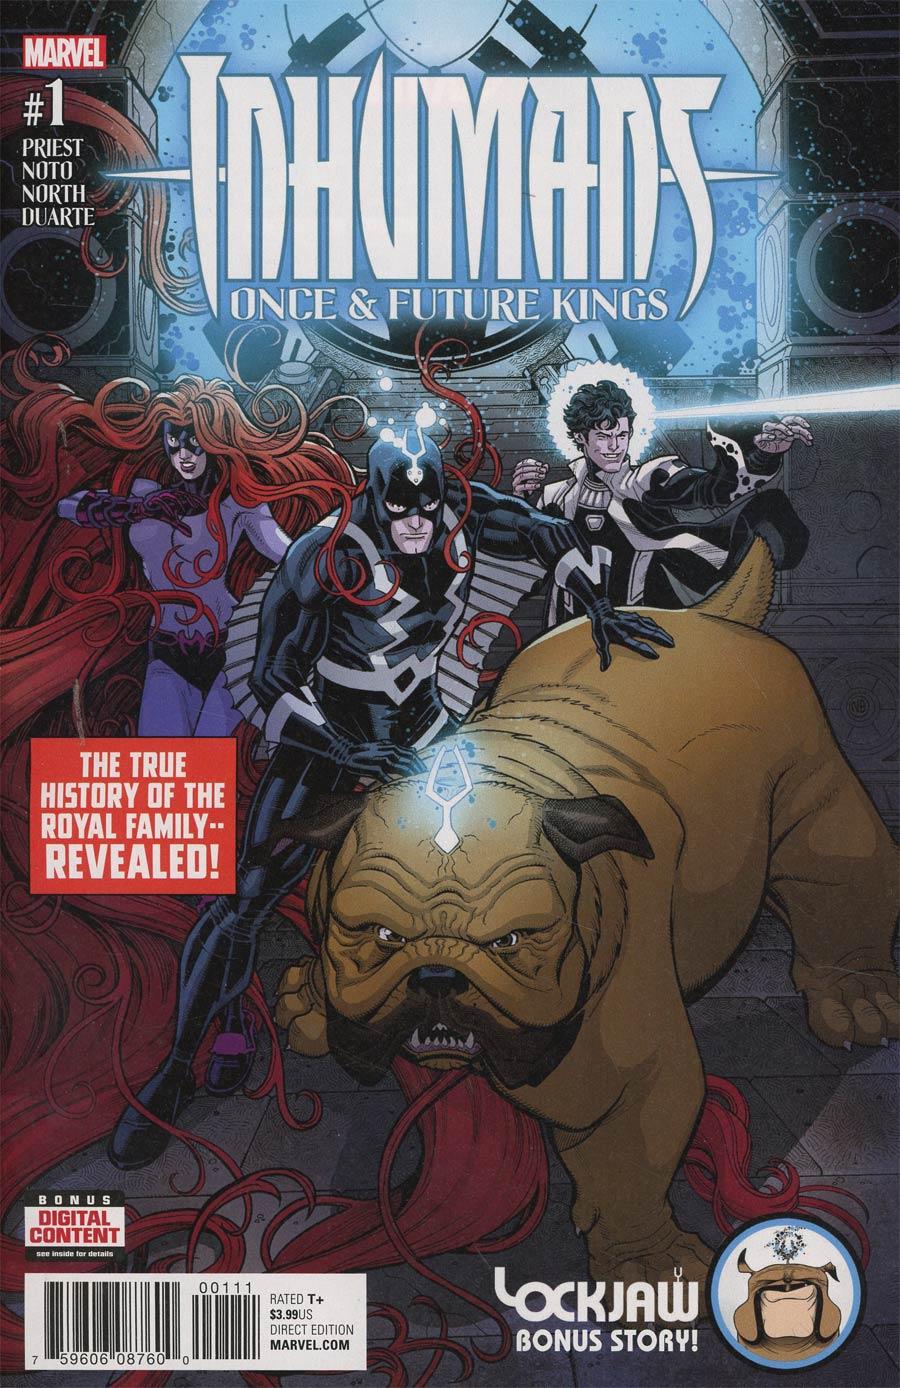 Inhumans Once And Future Kings Vol. 1 #1